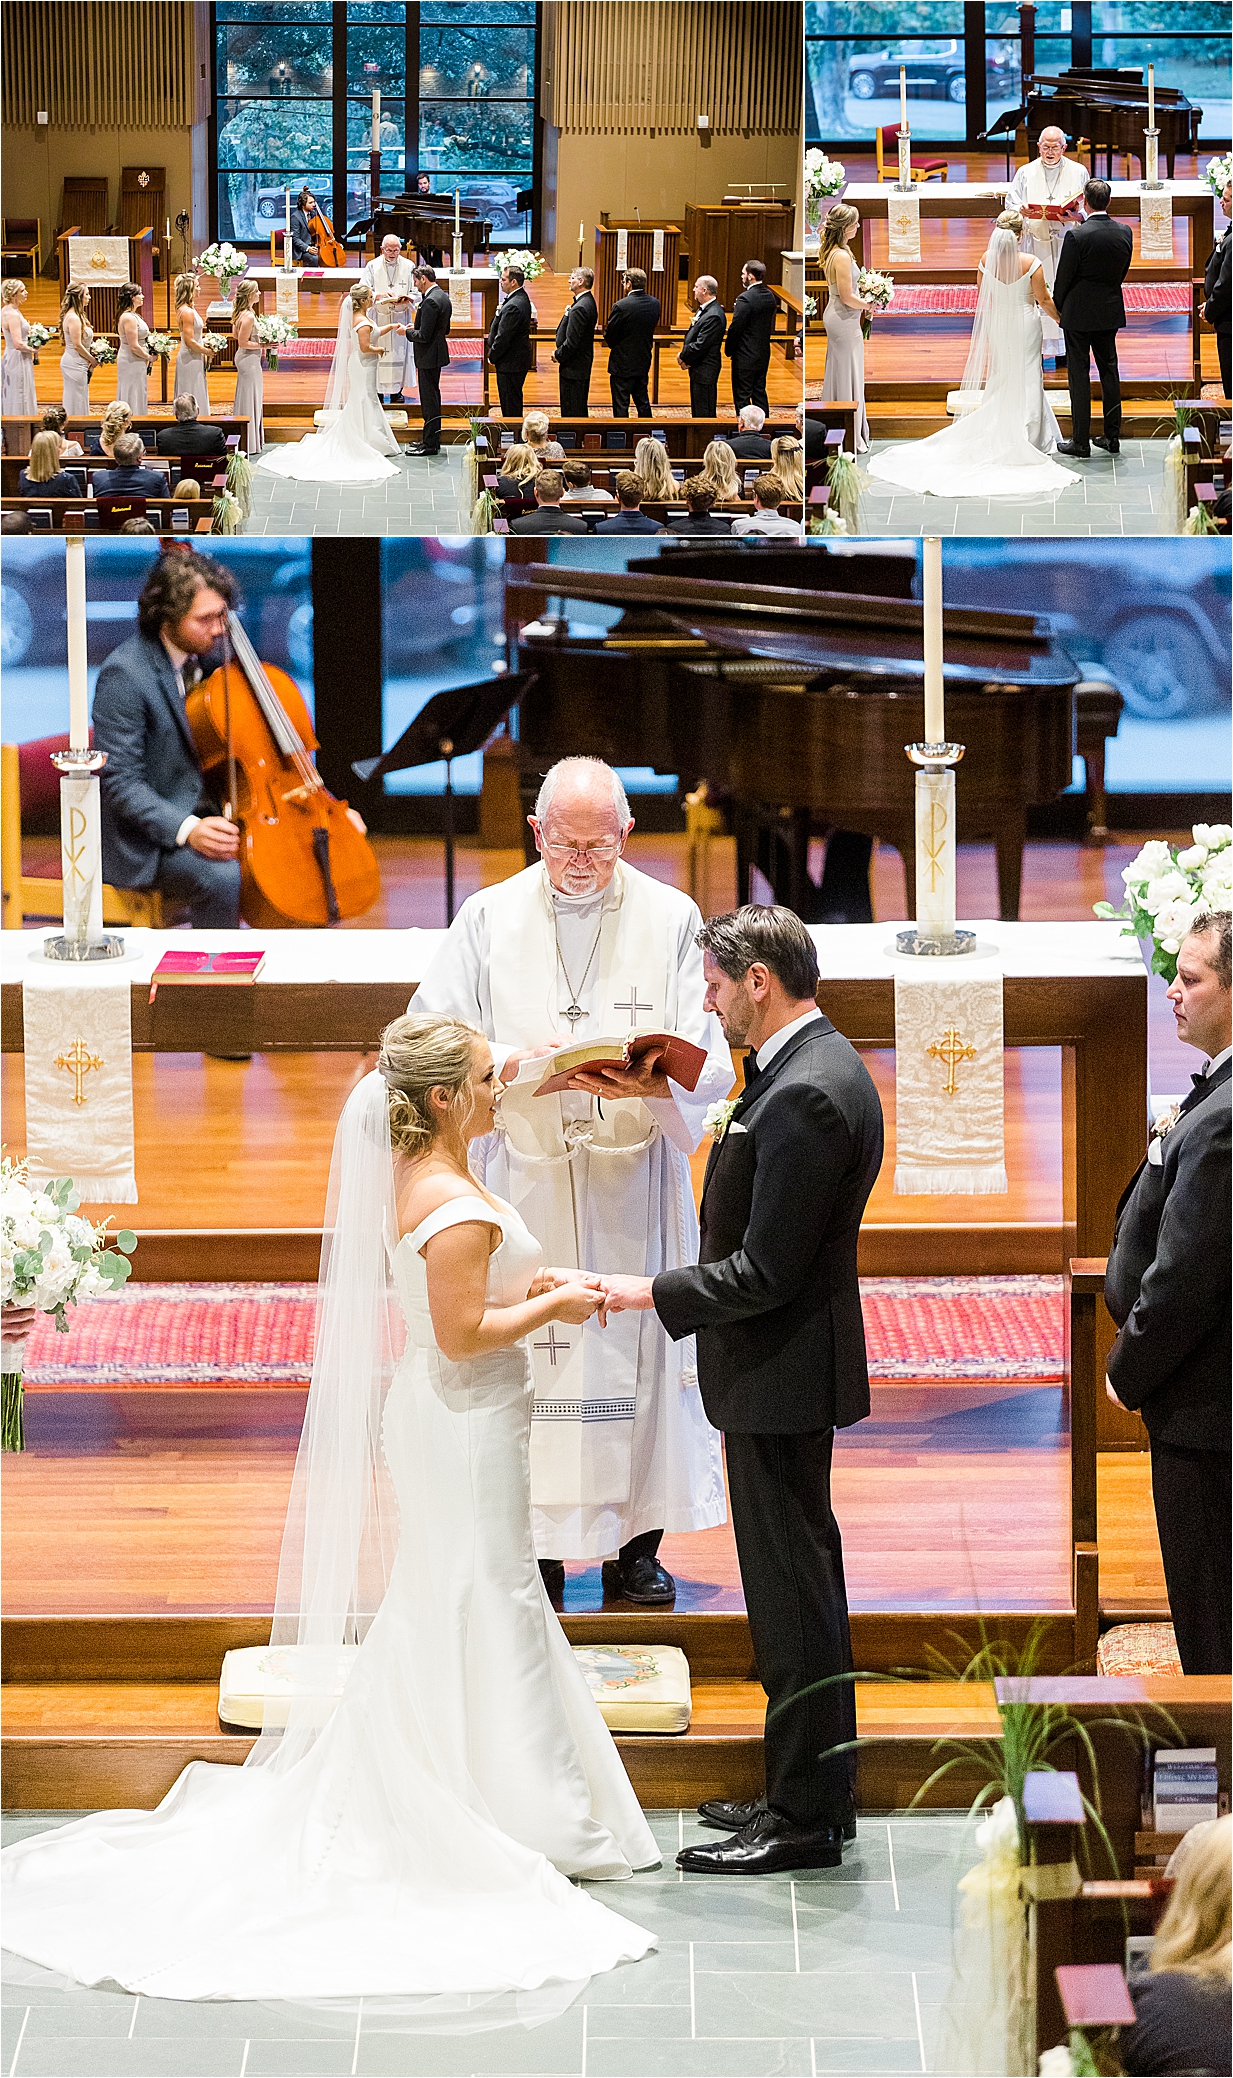 A bride and groom exchange vows during their church wedding ceremony in San Antonio, Texas